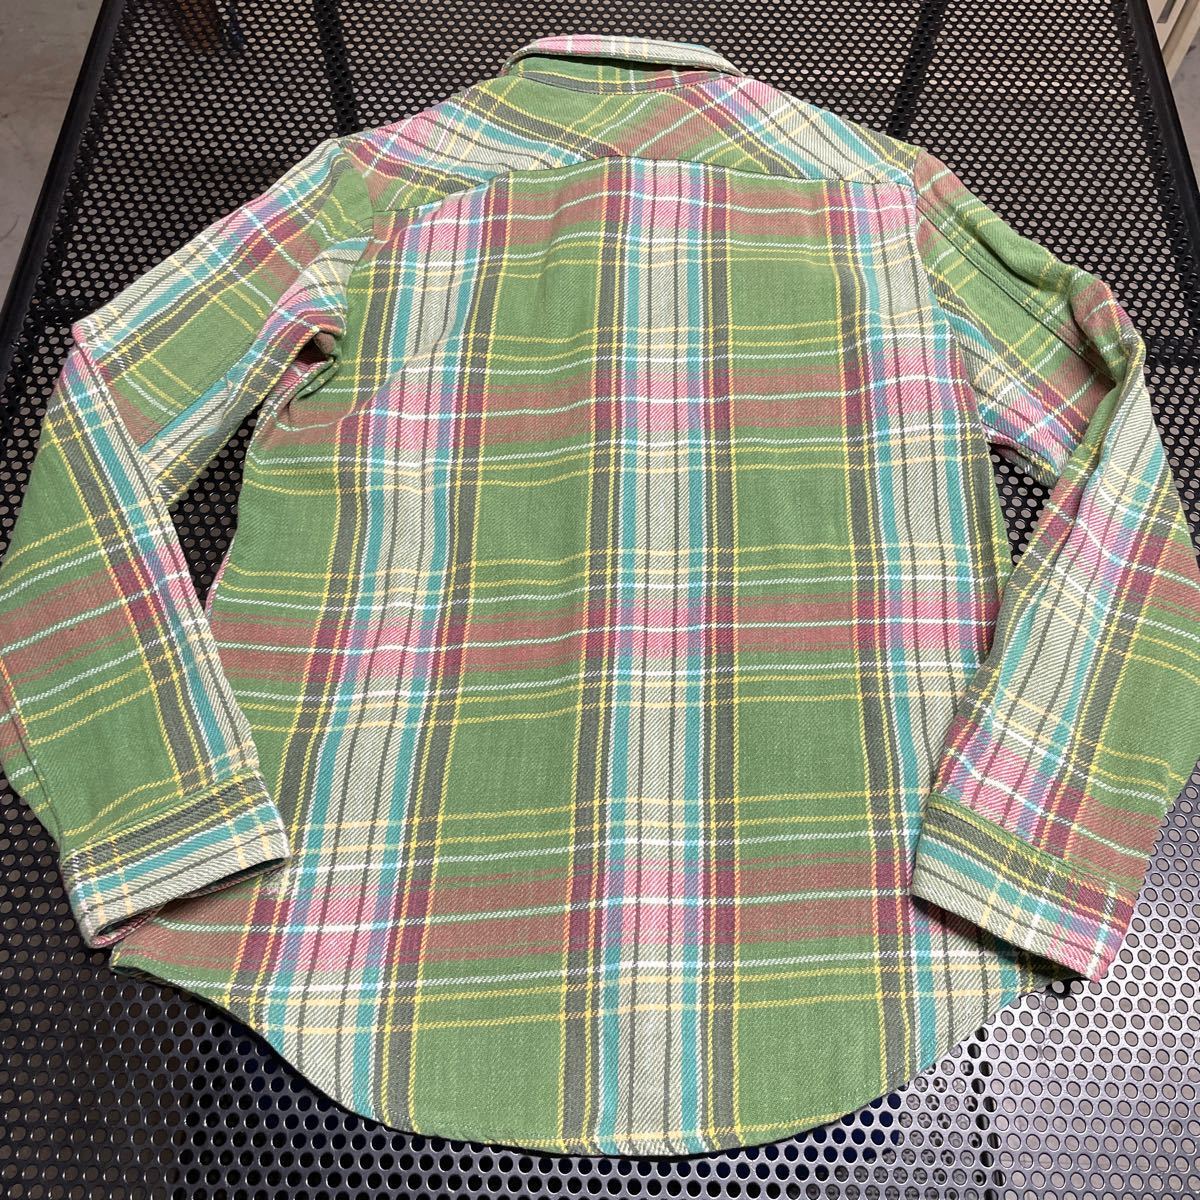  made in Japan Hollywood Ranch Market long sleeve flannel shirt Bick Mac cloth manner check 2 size green green 